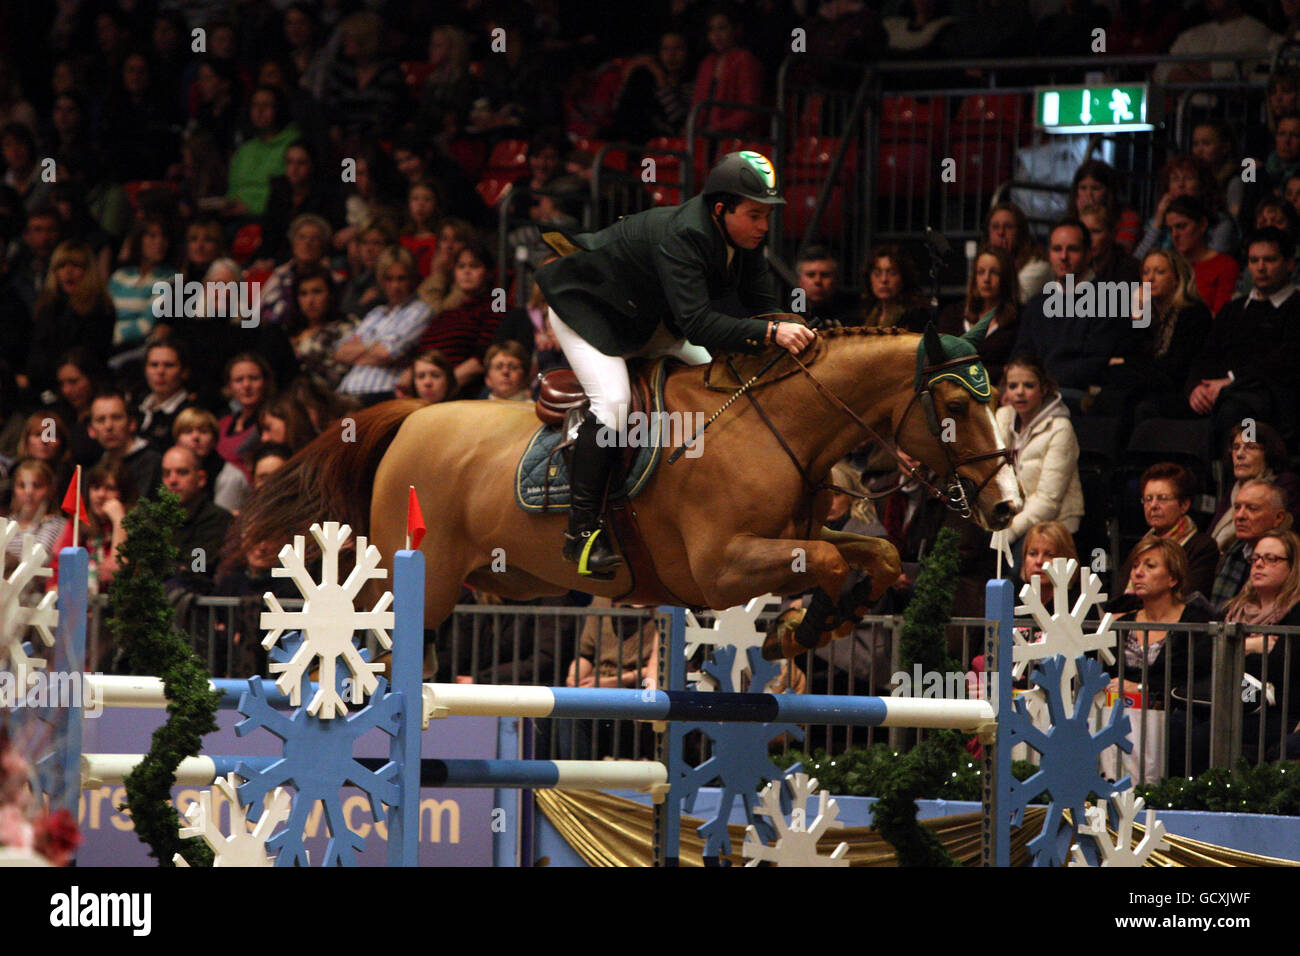 Ireland's Cian O'Connor riding Splendor 2 wins the Santa Stakes during the London International Horse Show at the Olympia Exhibition Centre, London. Stock Photo